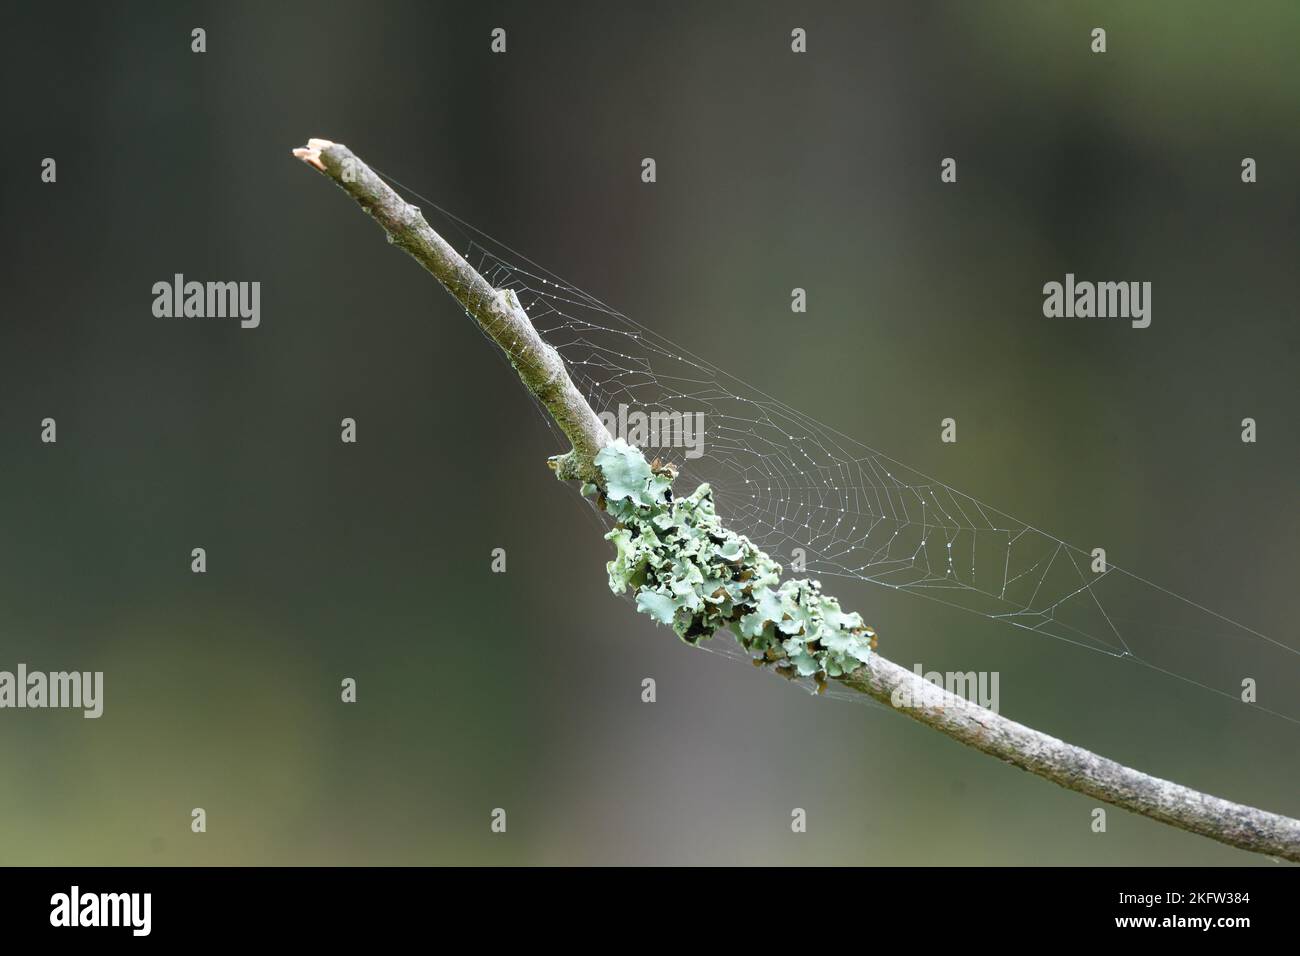 Lichen covered twig with blurred background Stock Photo